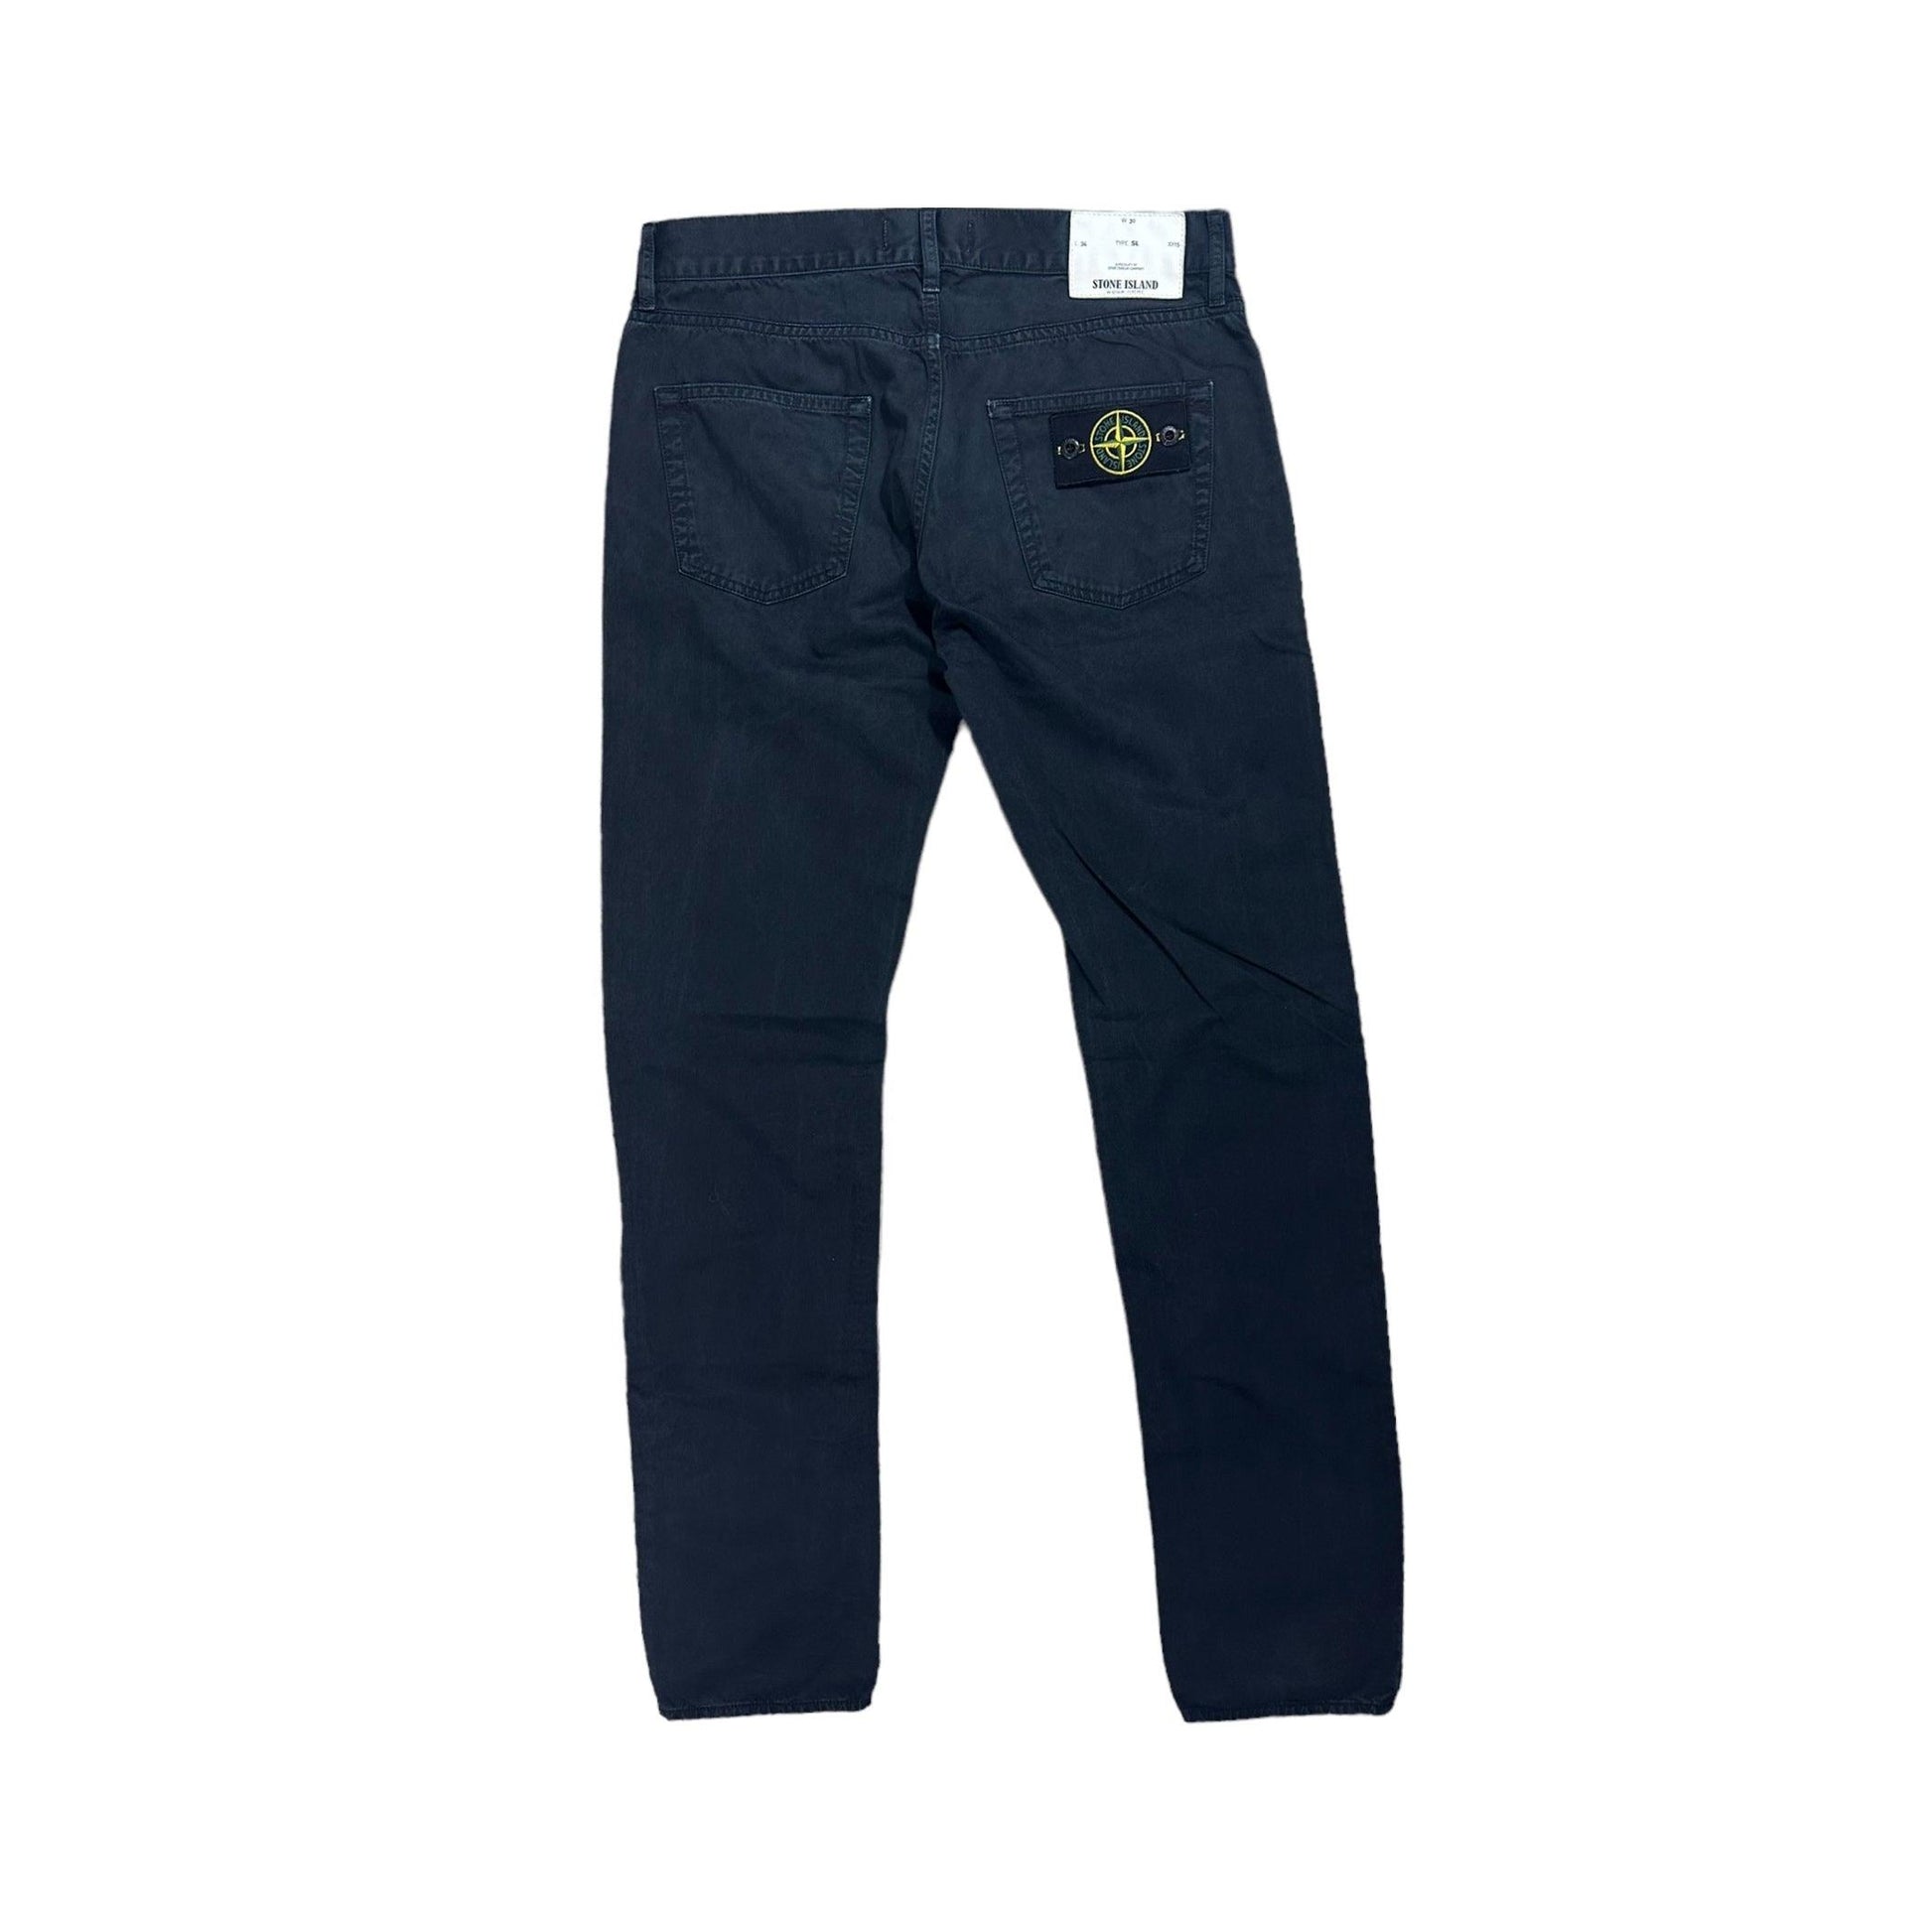 Stone Island Slim Fit Chino Bottoms - Known Source